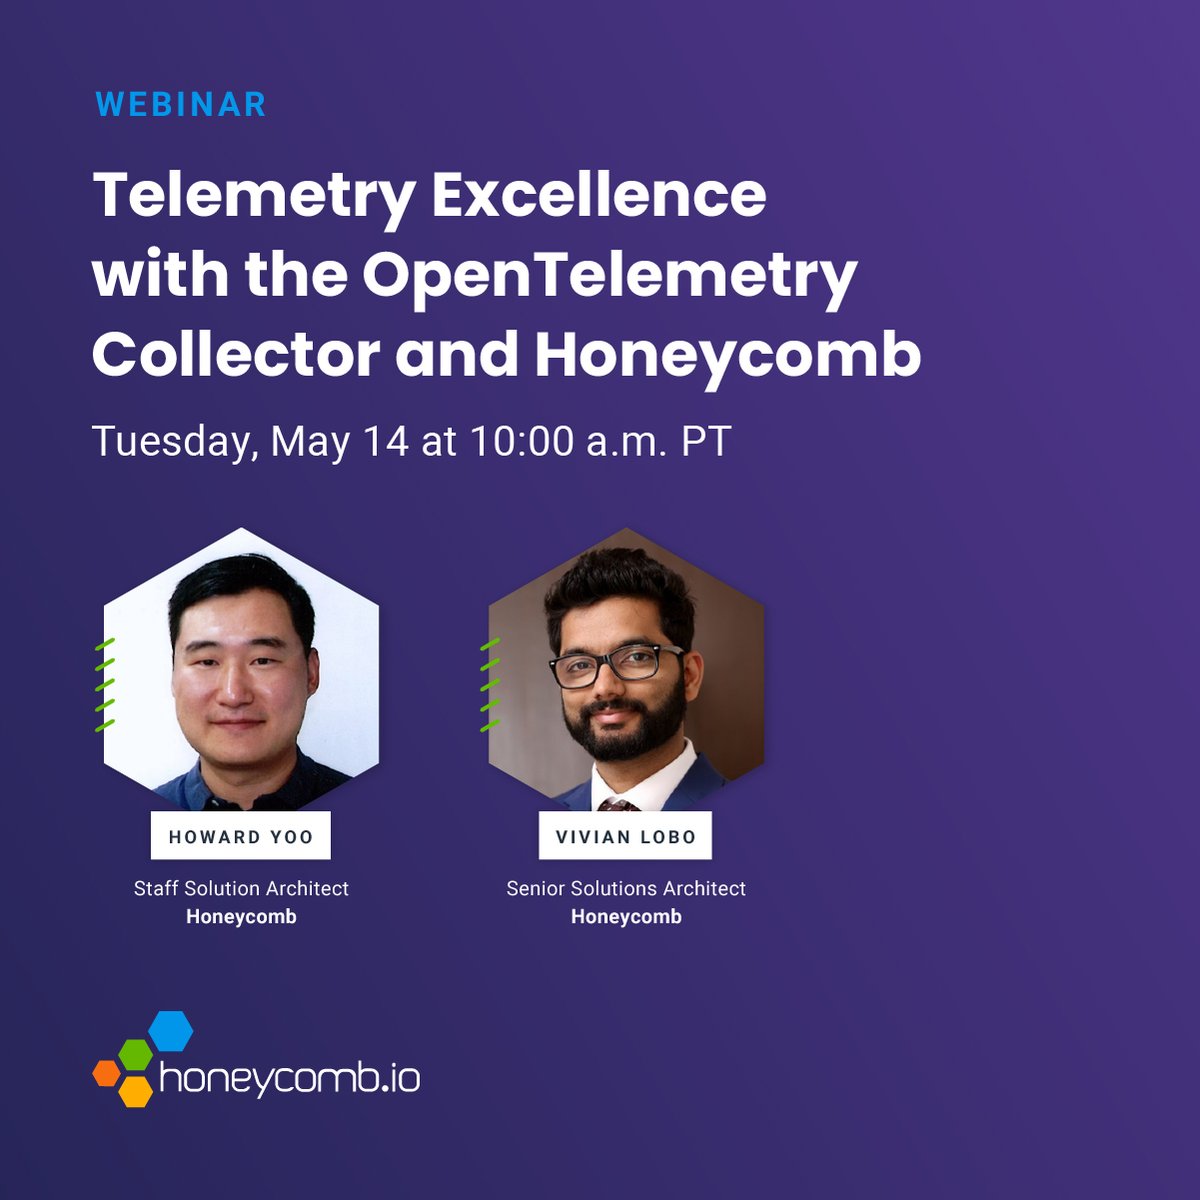 In our 'Telemetry Excellence with the OpenTelemetry Collector & Honeycomb' workshop, you'll dive deep into the concept and basics of OpenTelemetry collector with experts Howard Yoo and Vivian Lobo. Learn more & register: info.honeycomb.io/telemetry-exce…